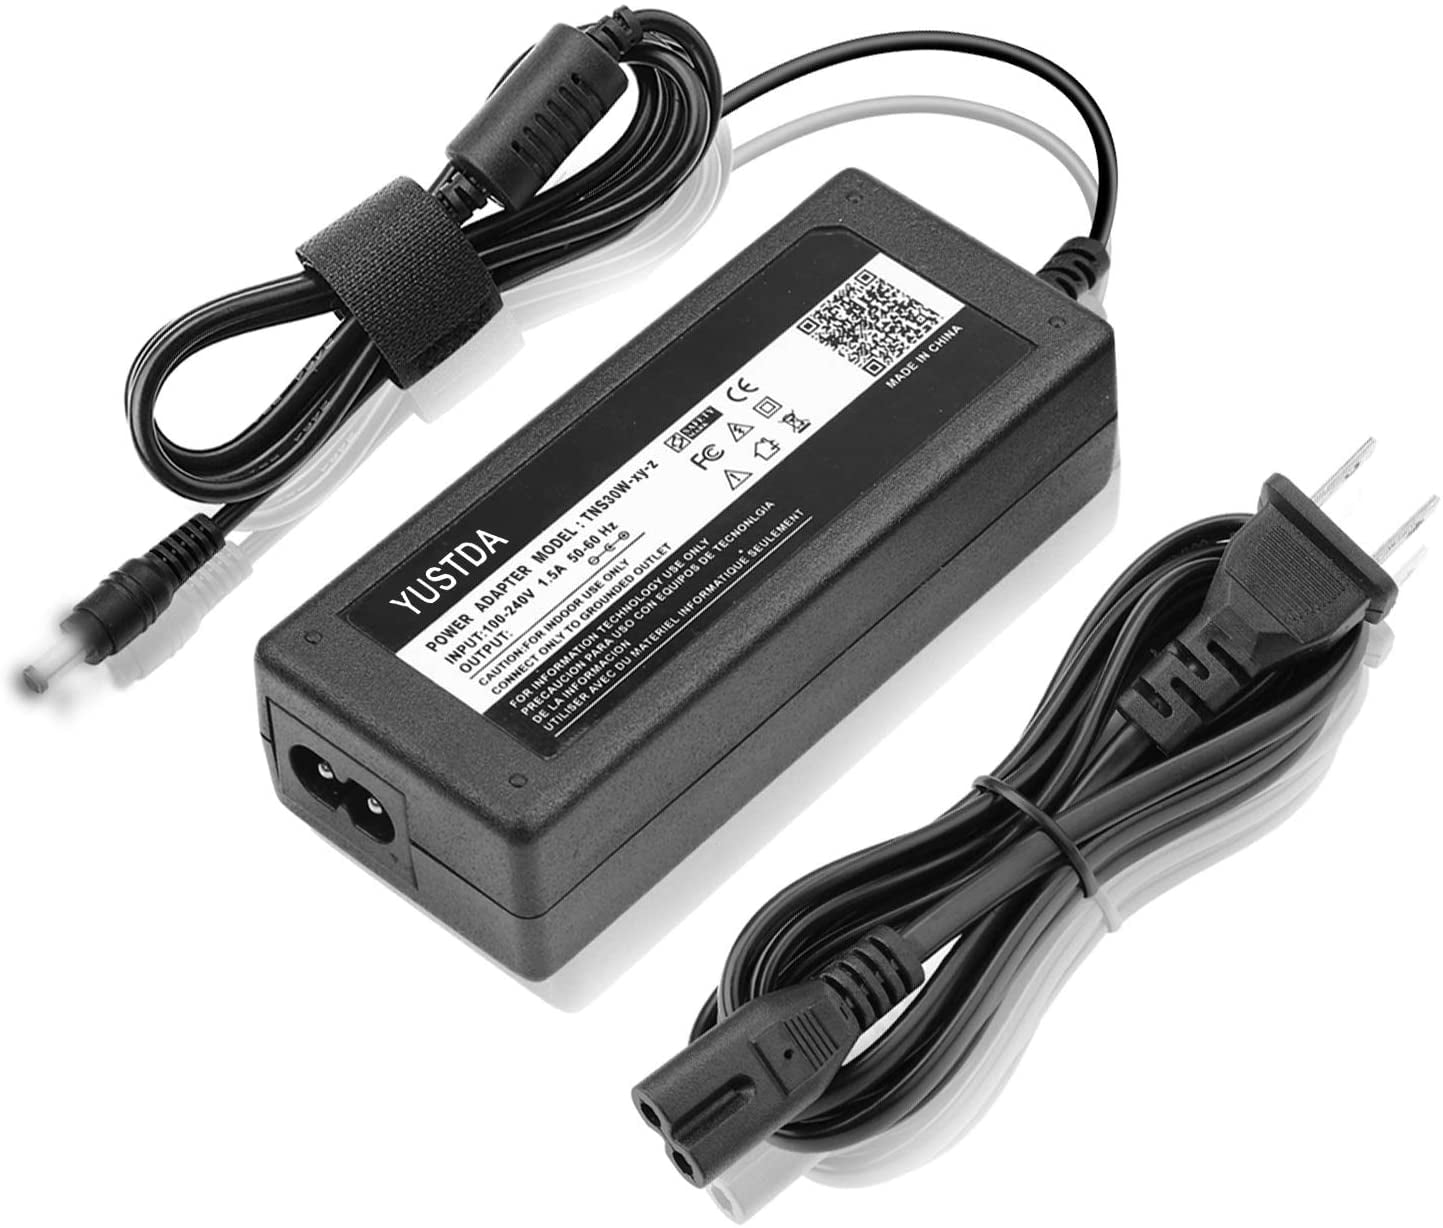 10Ft AC/DC Adapter Replacement for Fujitsu ScanSnap PA03360-B005 fi-5110EOX  PA03360-B205 fi-5110EOX2 FI-5110 PA03360-B215 600DPI 15PPM PA03360-B505  A03360-B605R Scanner Power Supply Cord Charger PSU